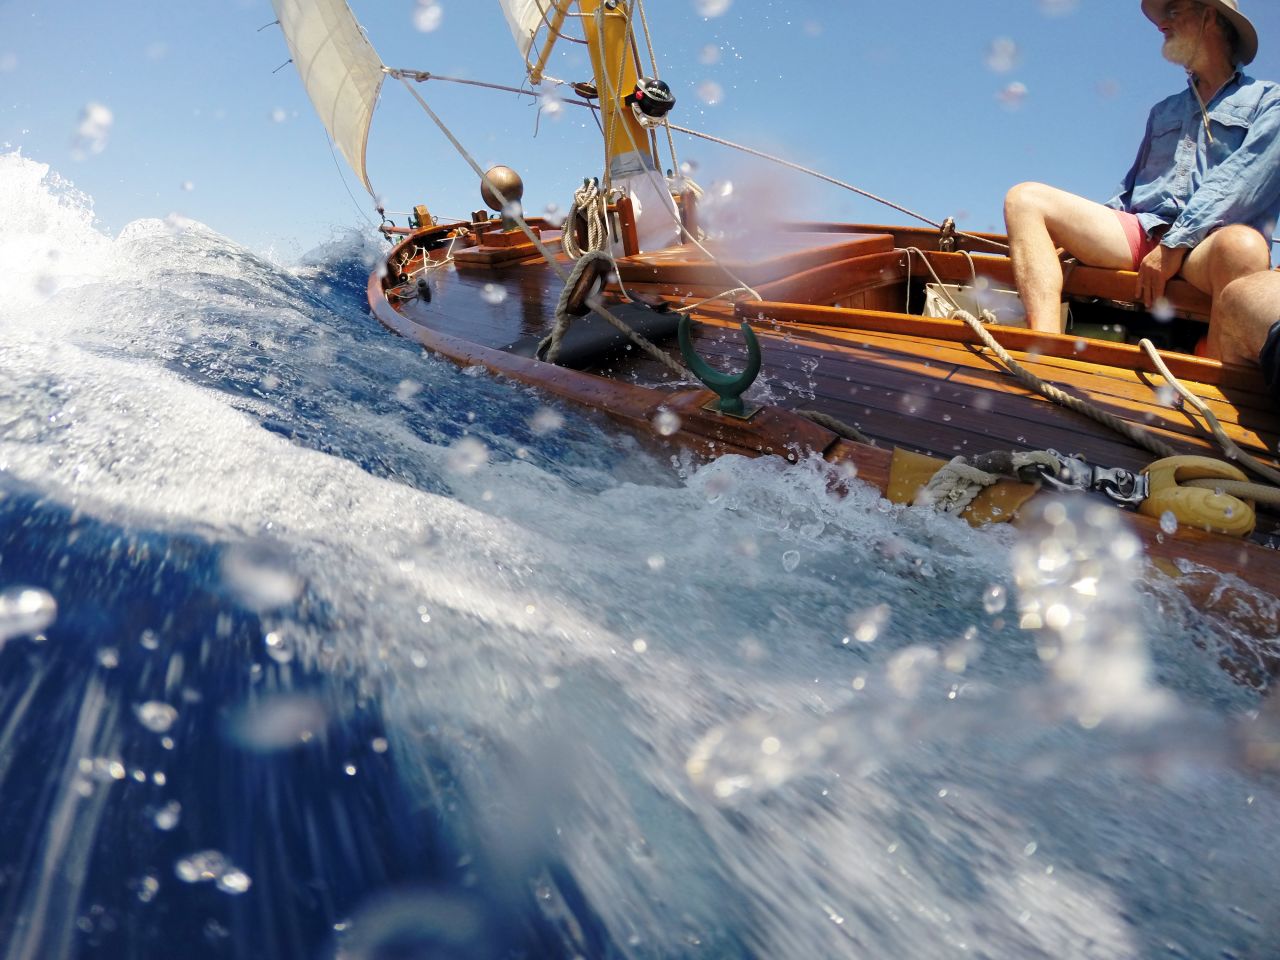 The six-meter Chryssopigi won her class at the Cyclades Classic Yacht Race in the Aegean Sea. The boat is built in wood and based on a traditional Greek fishing vessel.